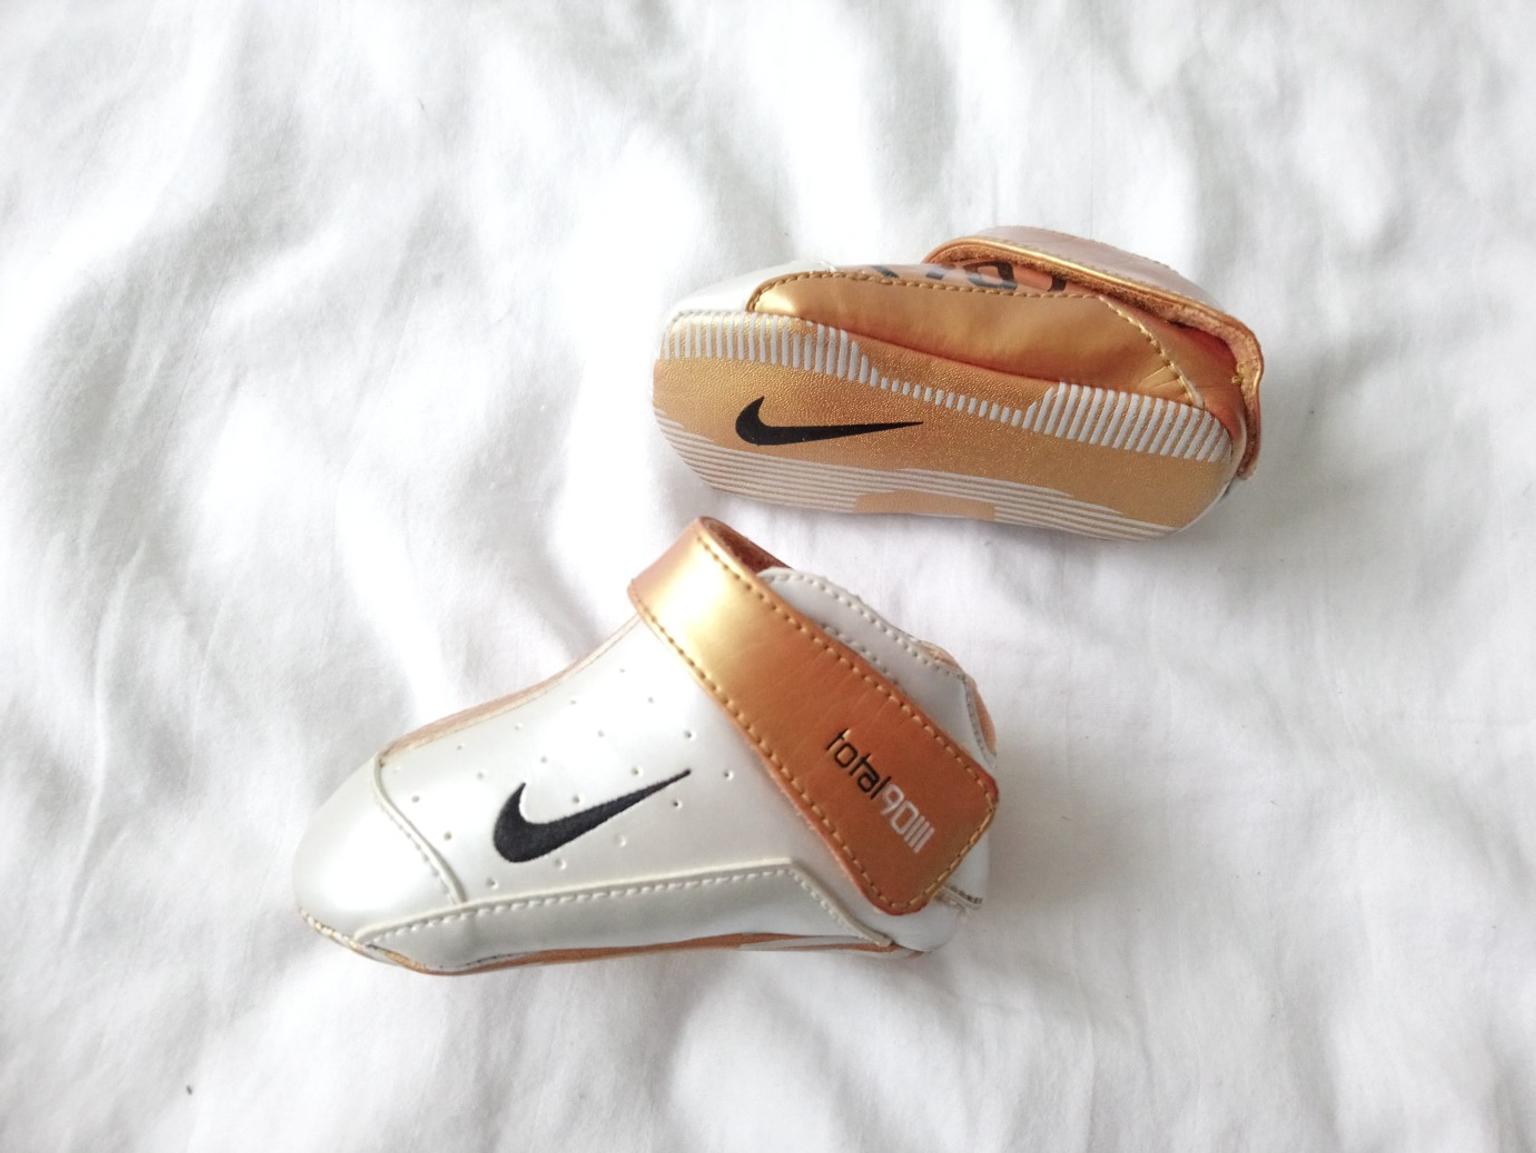 Nike baby Boys first pram shoes size 1 